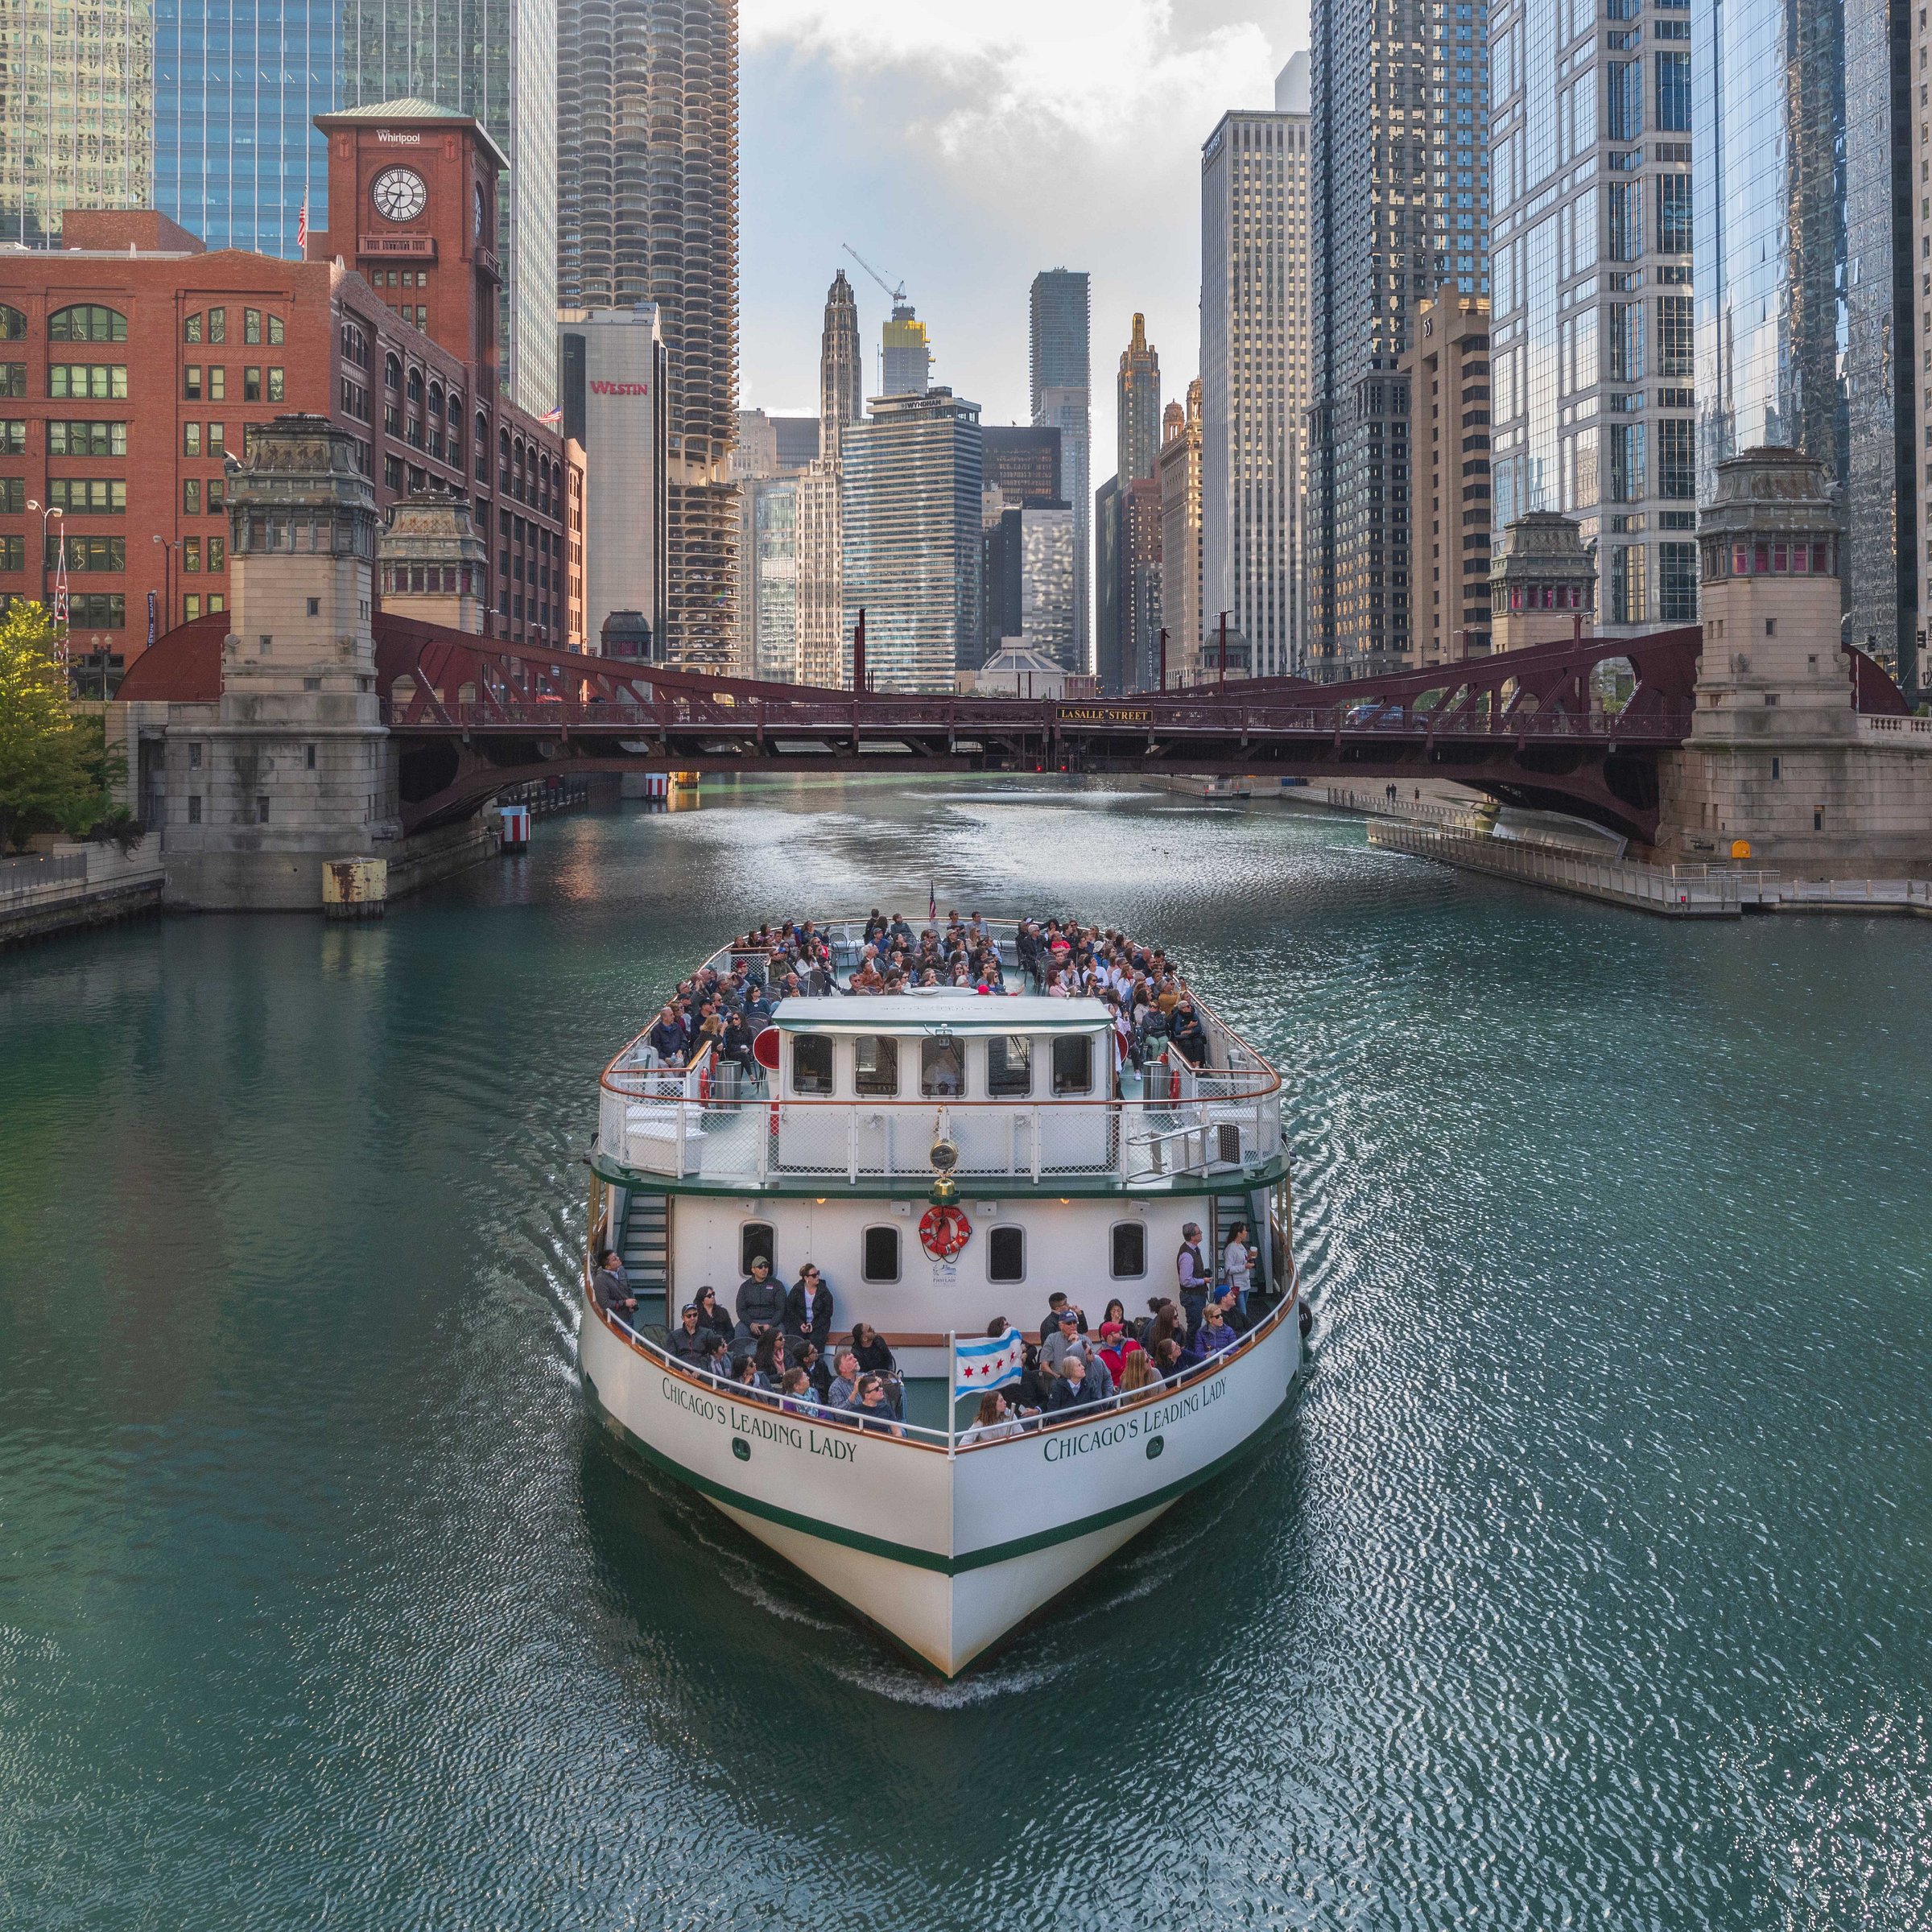 List 104+ Images chicago’s first lady cruises photos Superb